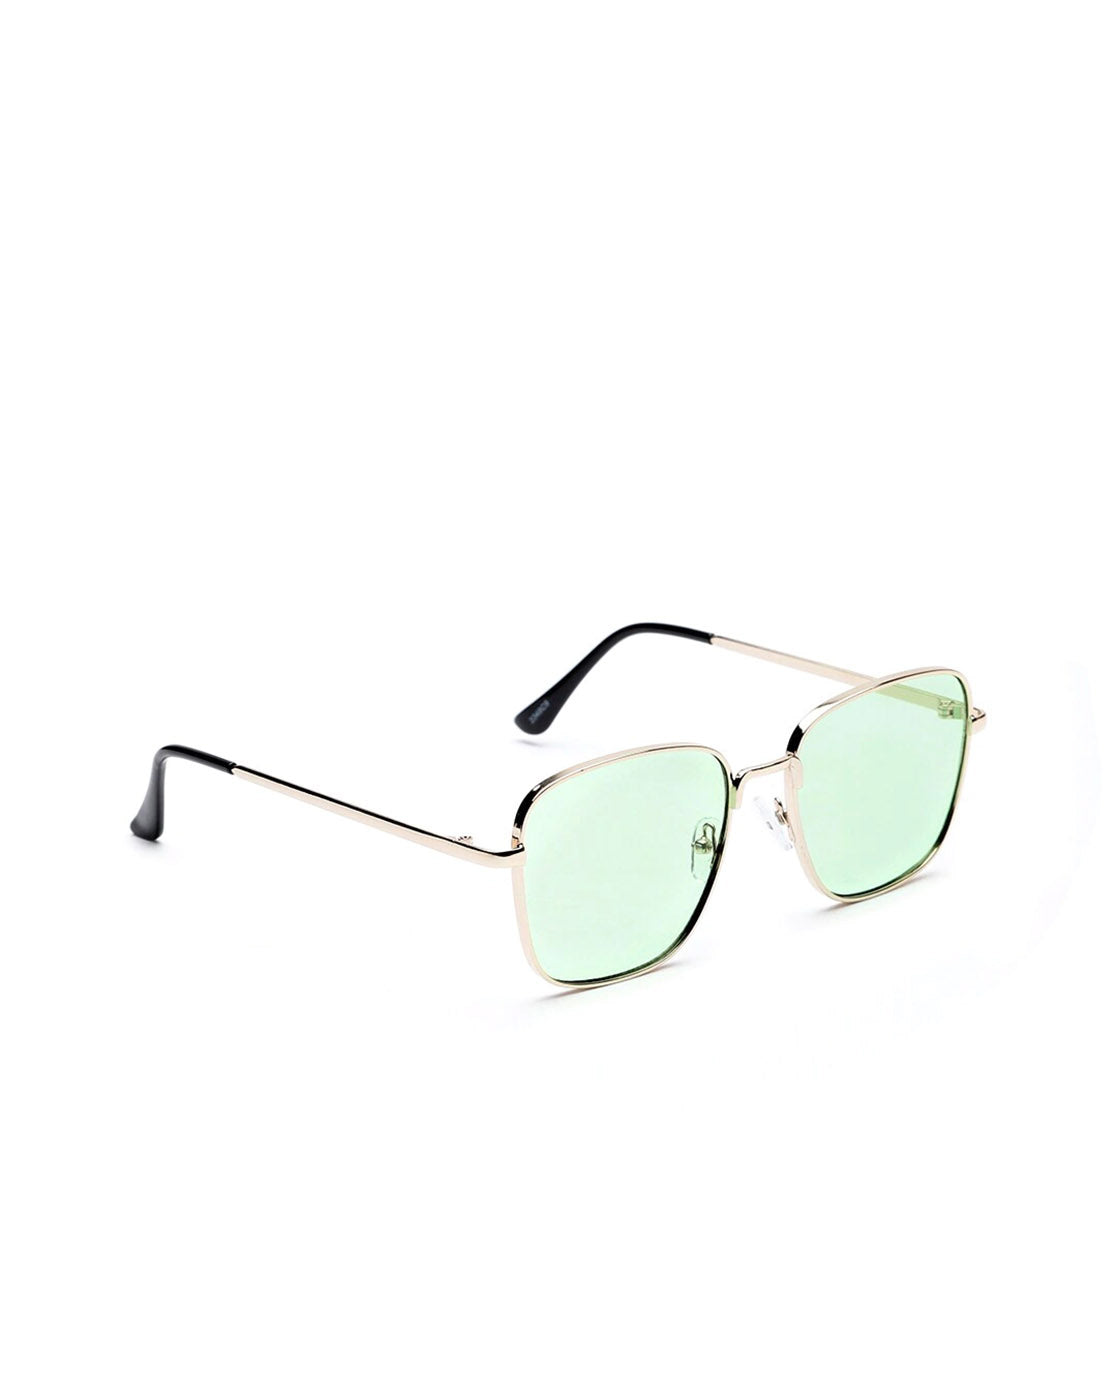 Spitfire cut eighty nine rectangle sunglasses in black with green lens |  ASOS